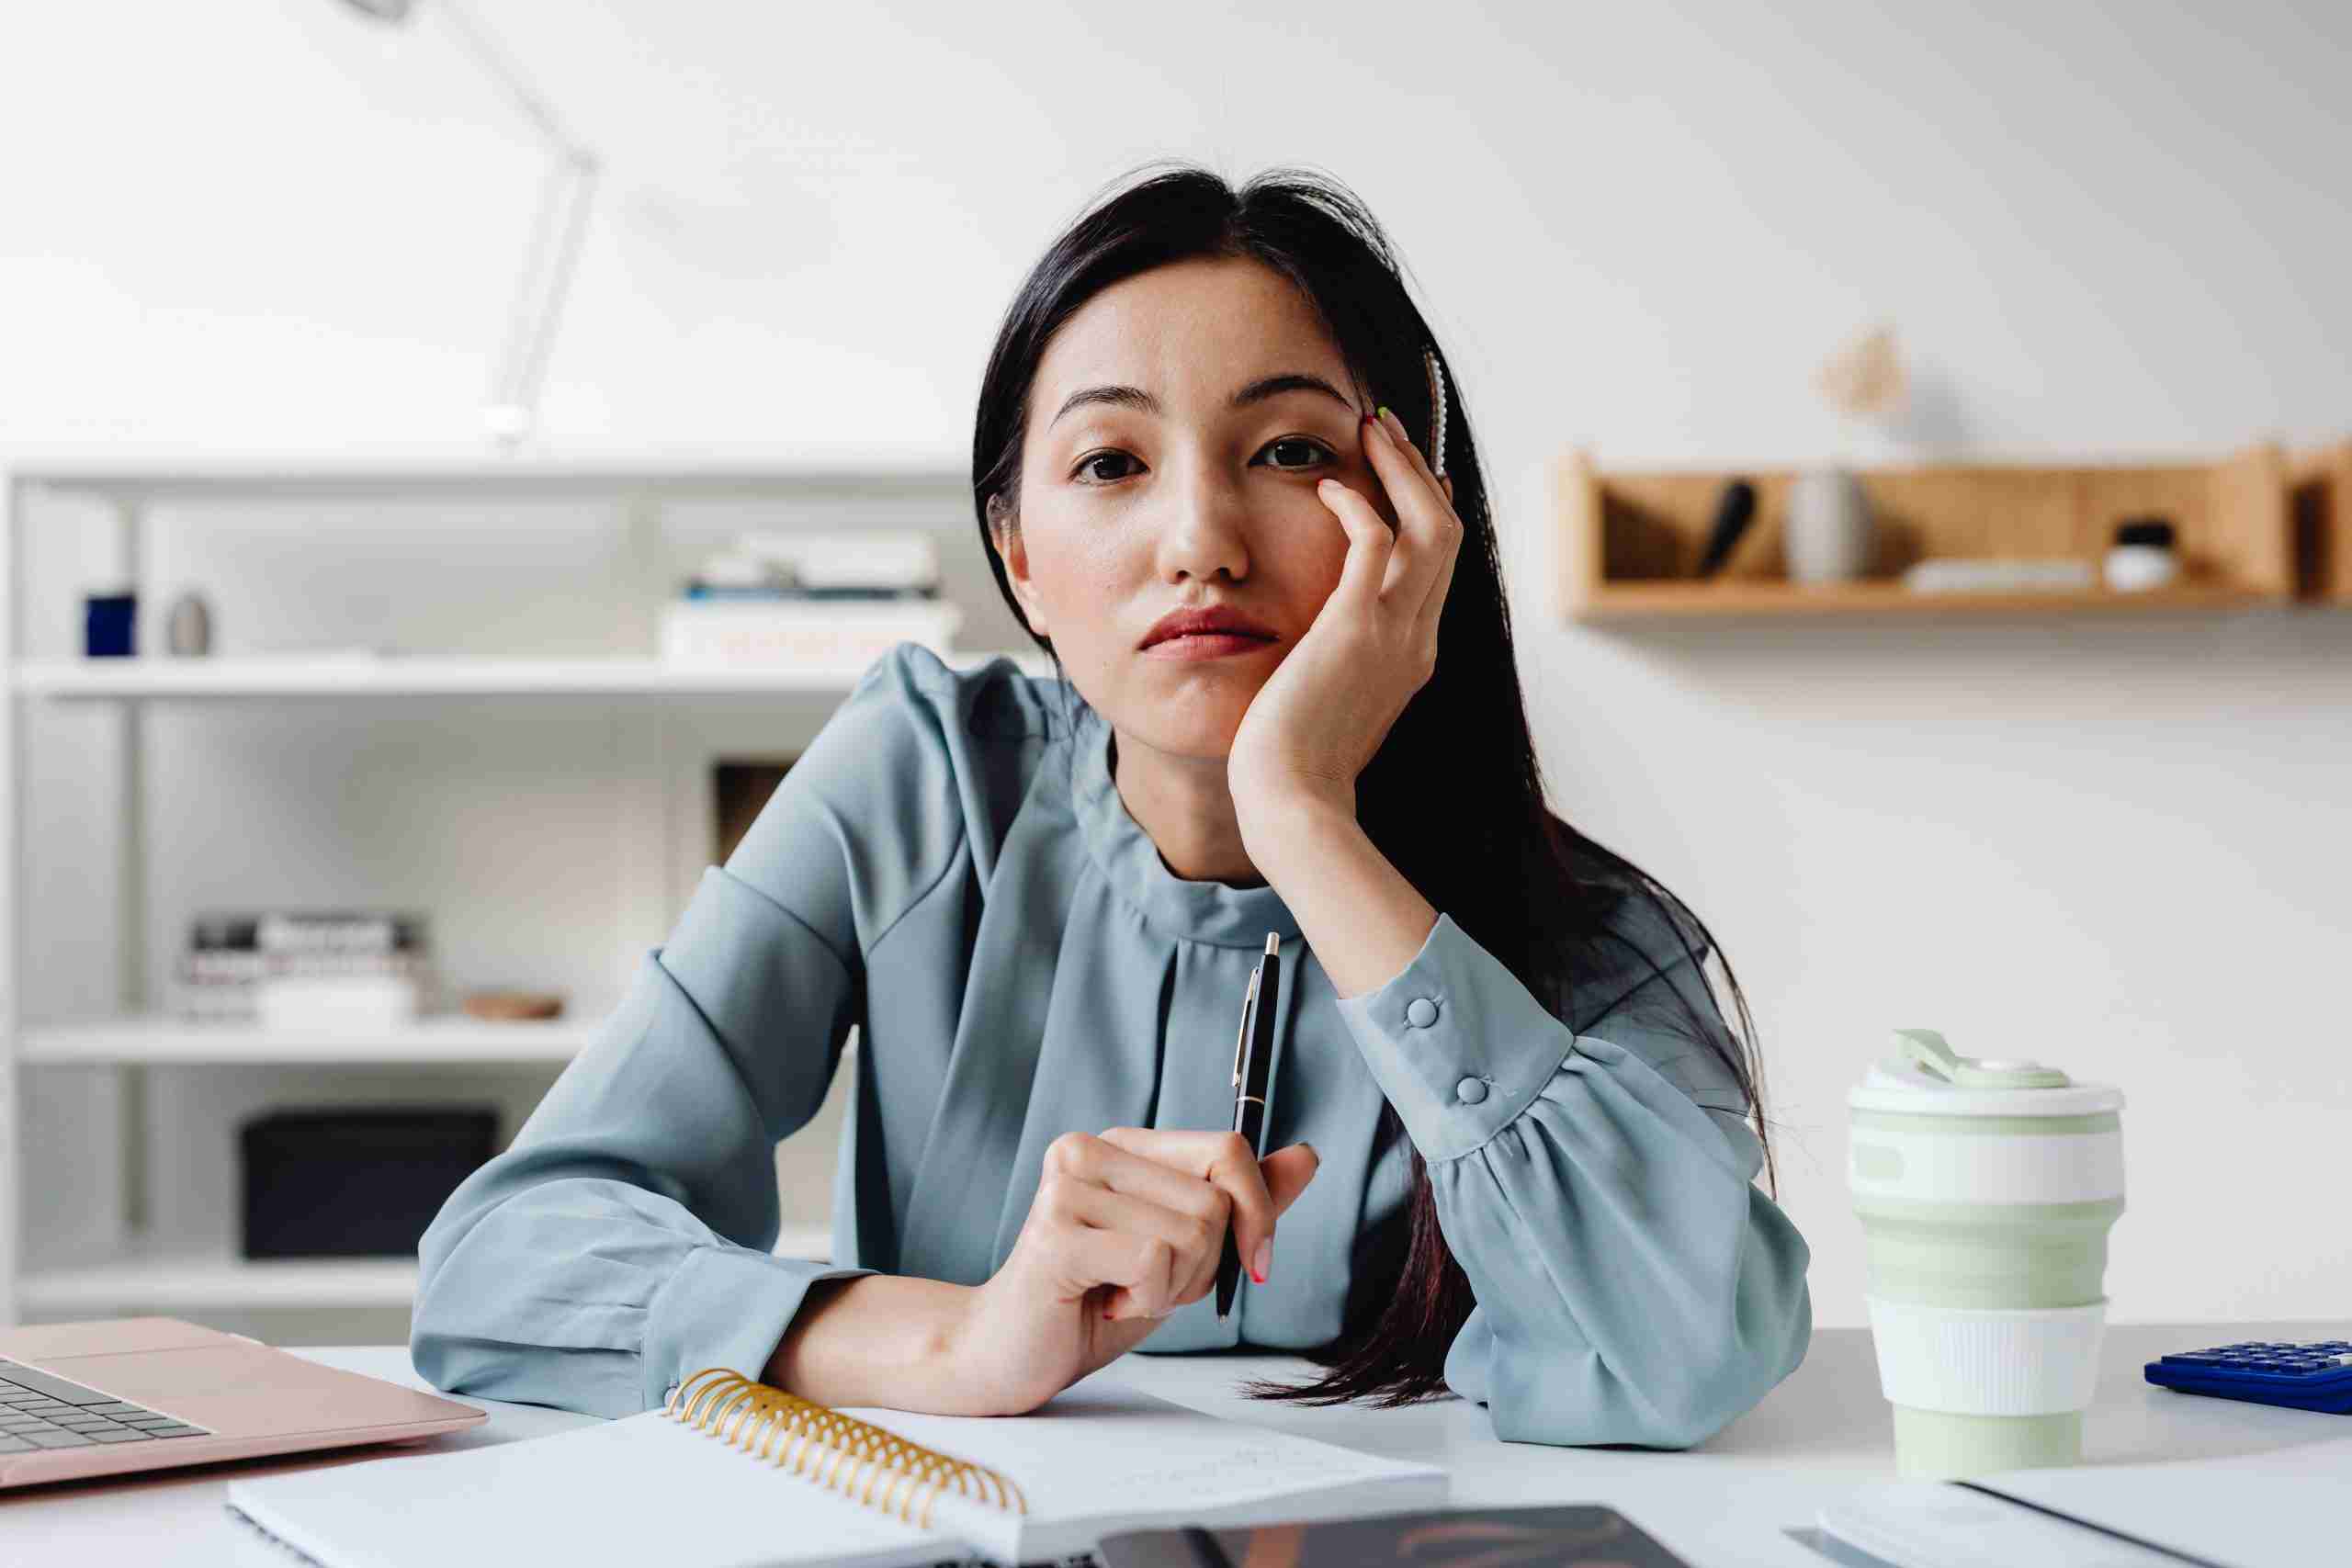 An image of a young woman at an office, looking bored, conveying the negative impact of a bad employee value proposition.